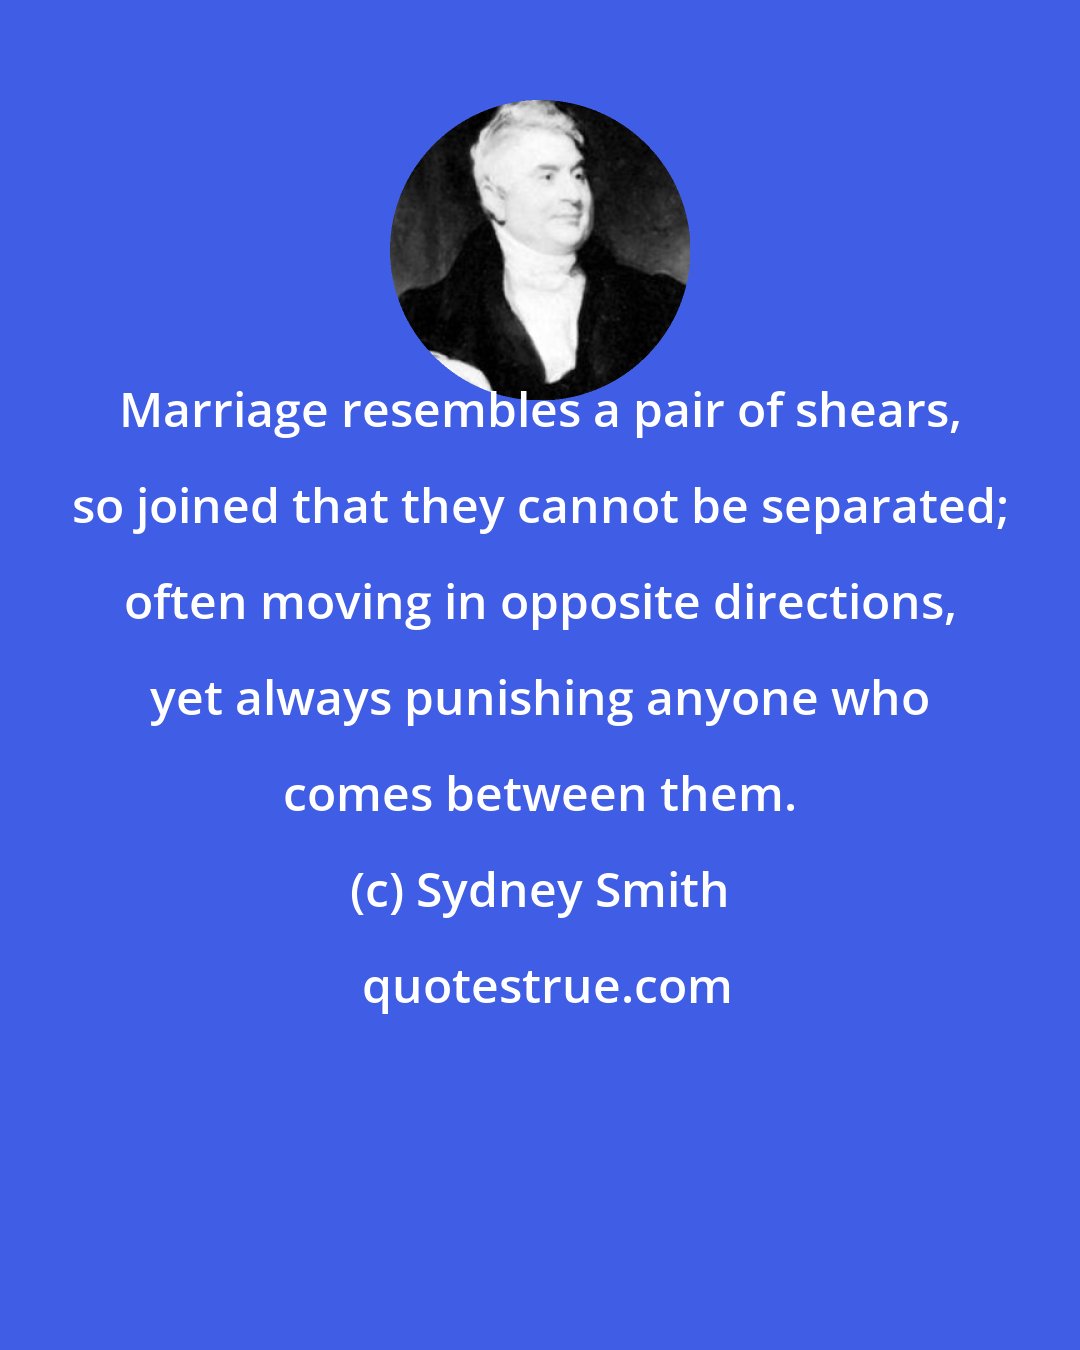 Sydney Smith: Marriage resembles a pair of shears, so joined that they cannot be separated; often moving in opposite directions, yet always punishing anyone who comes between them.